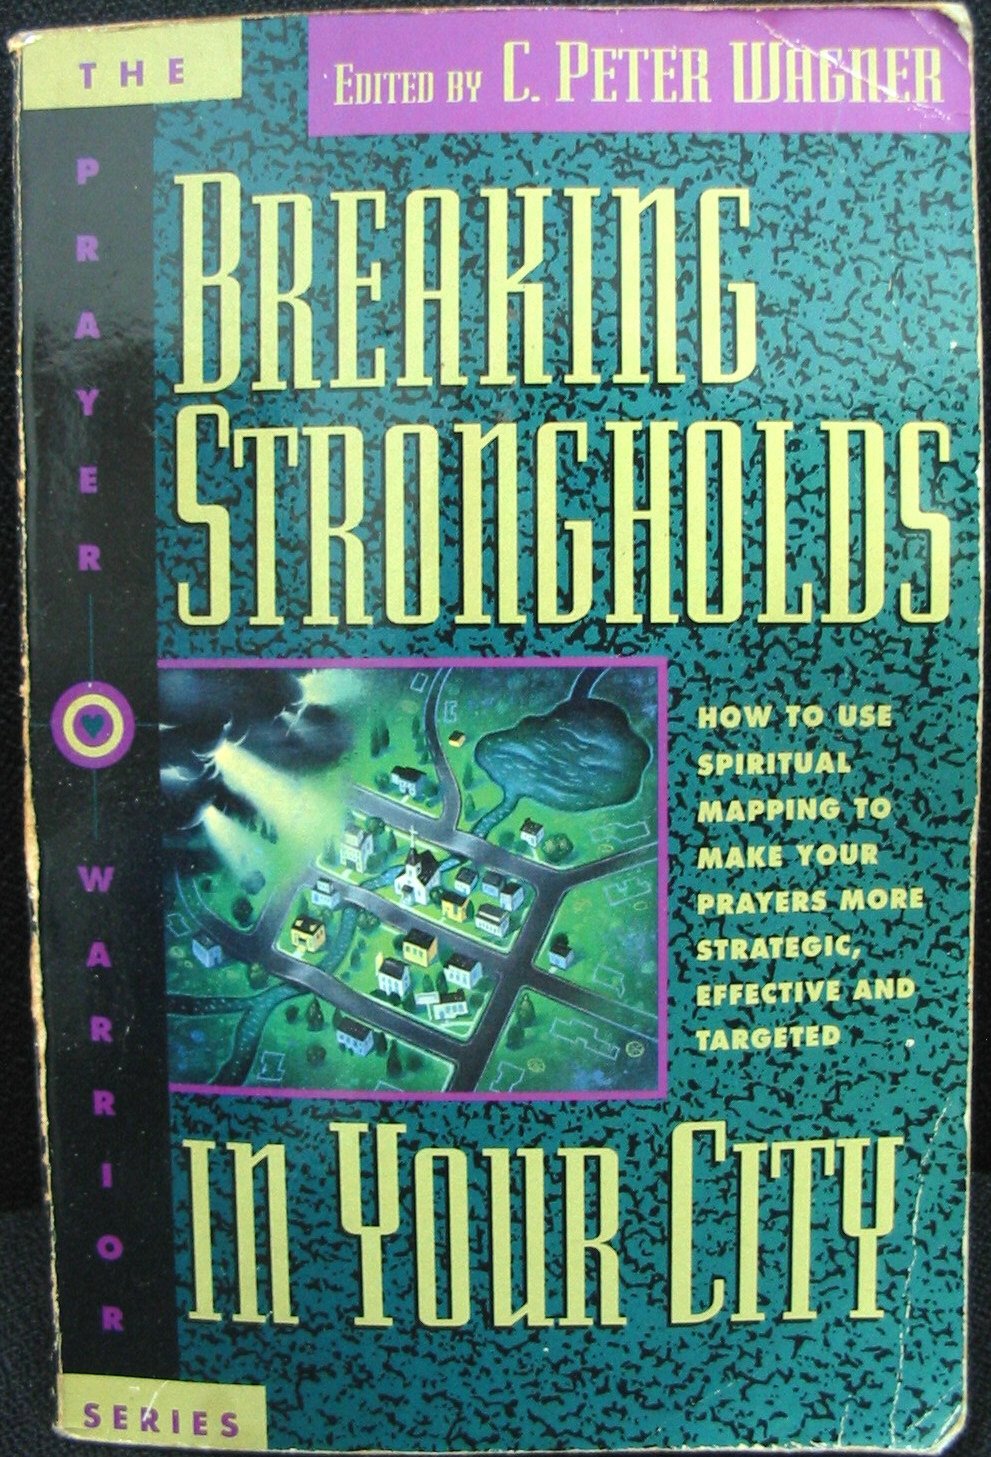 [Breaking+strongholds+in+your+city.jpg]